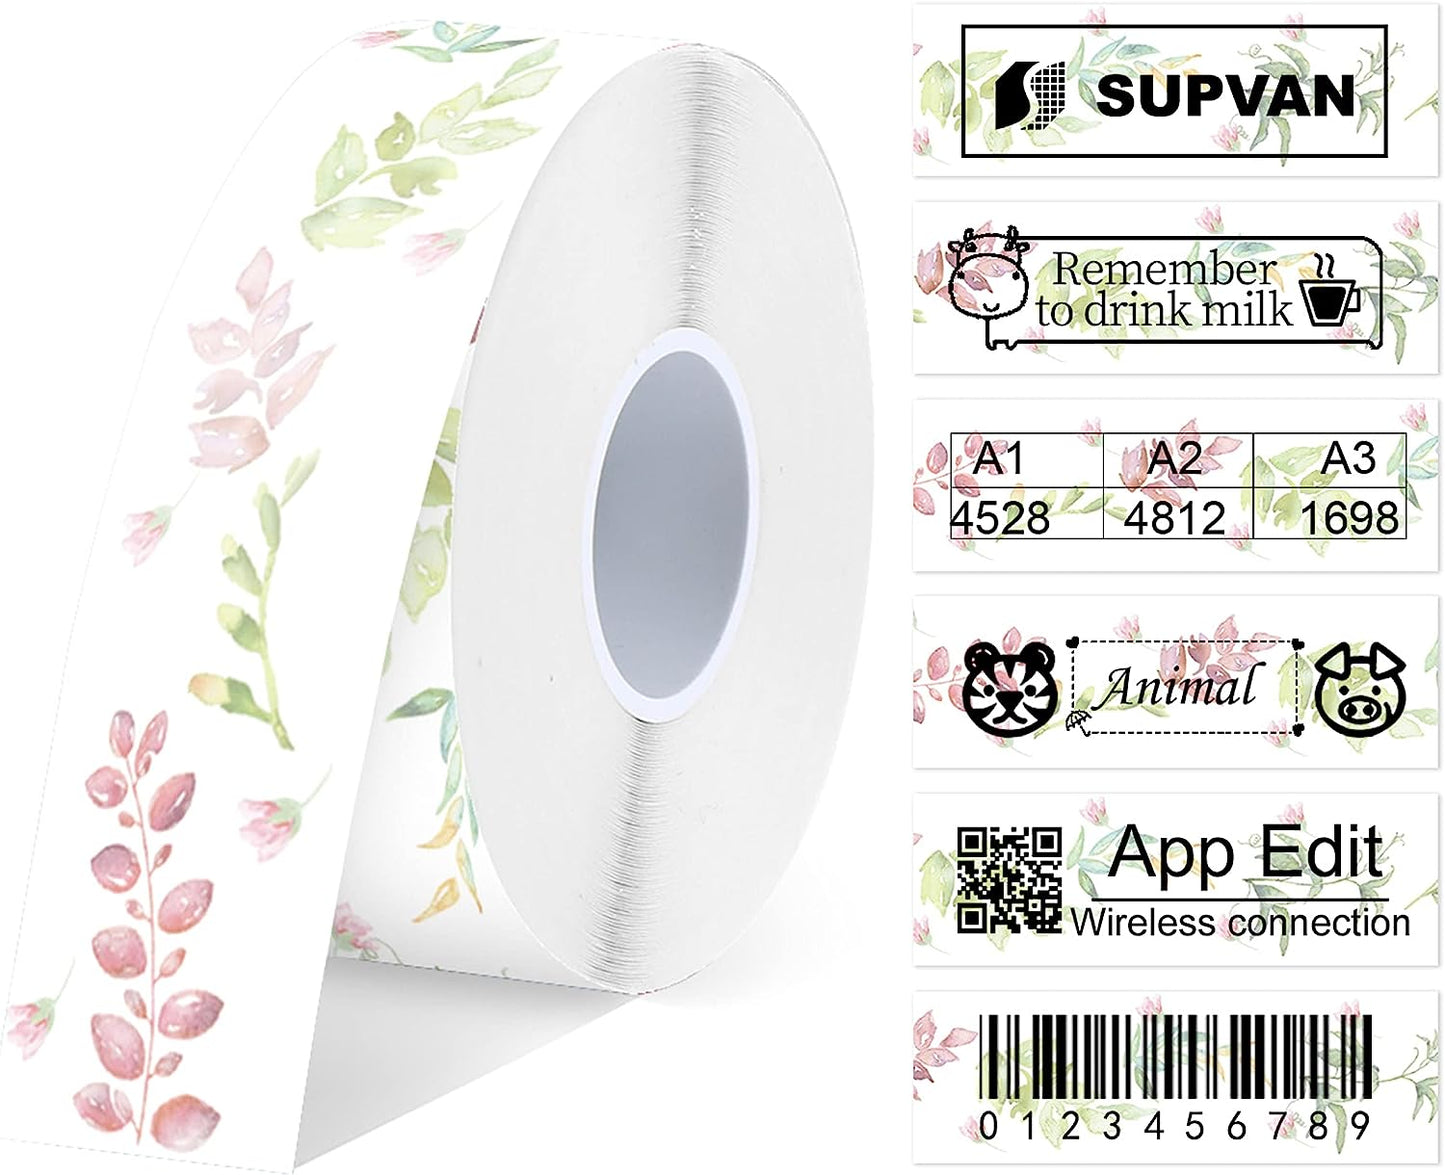  Label Maker Tape SUPVAN E10 Adapted Label Print Paper Refill  Fixed Size 0.47''x1.57'' 170 Labels/Roll Thermal Laminated Waterproof  Self-Adhesive Multipurpose Labeling Tape Replacement : Office Products